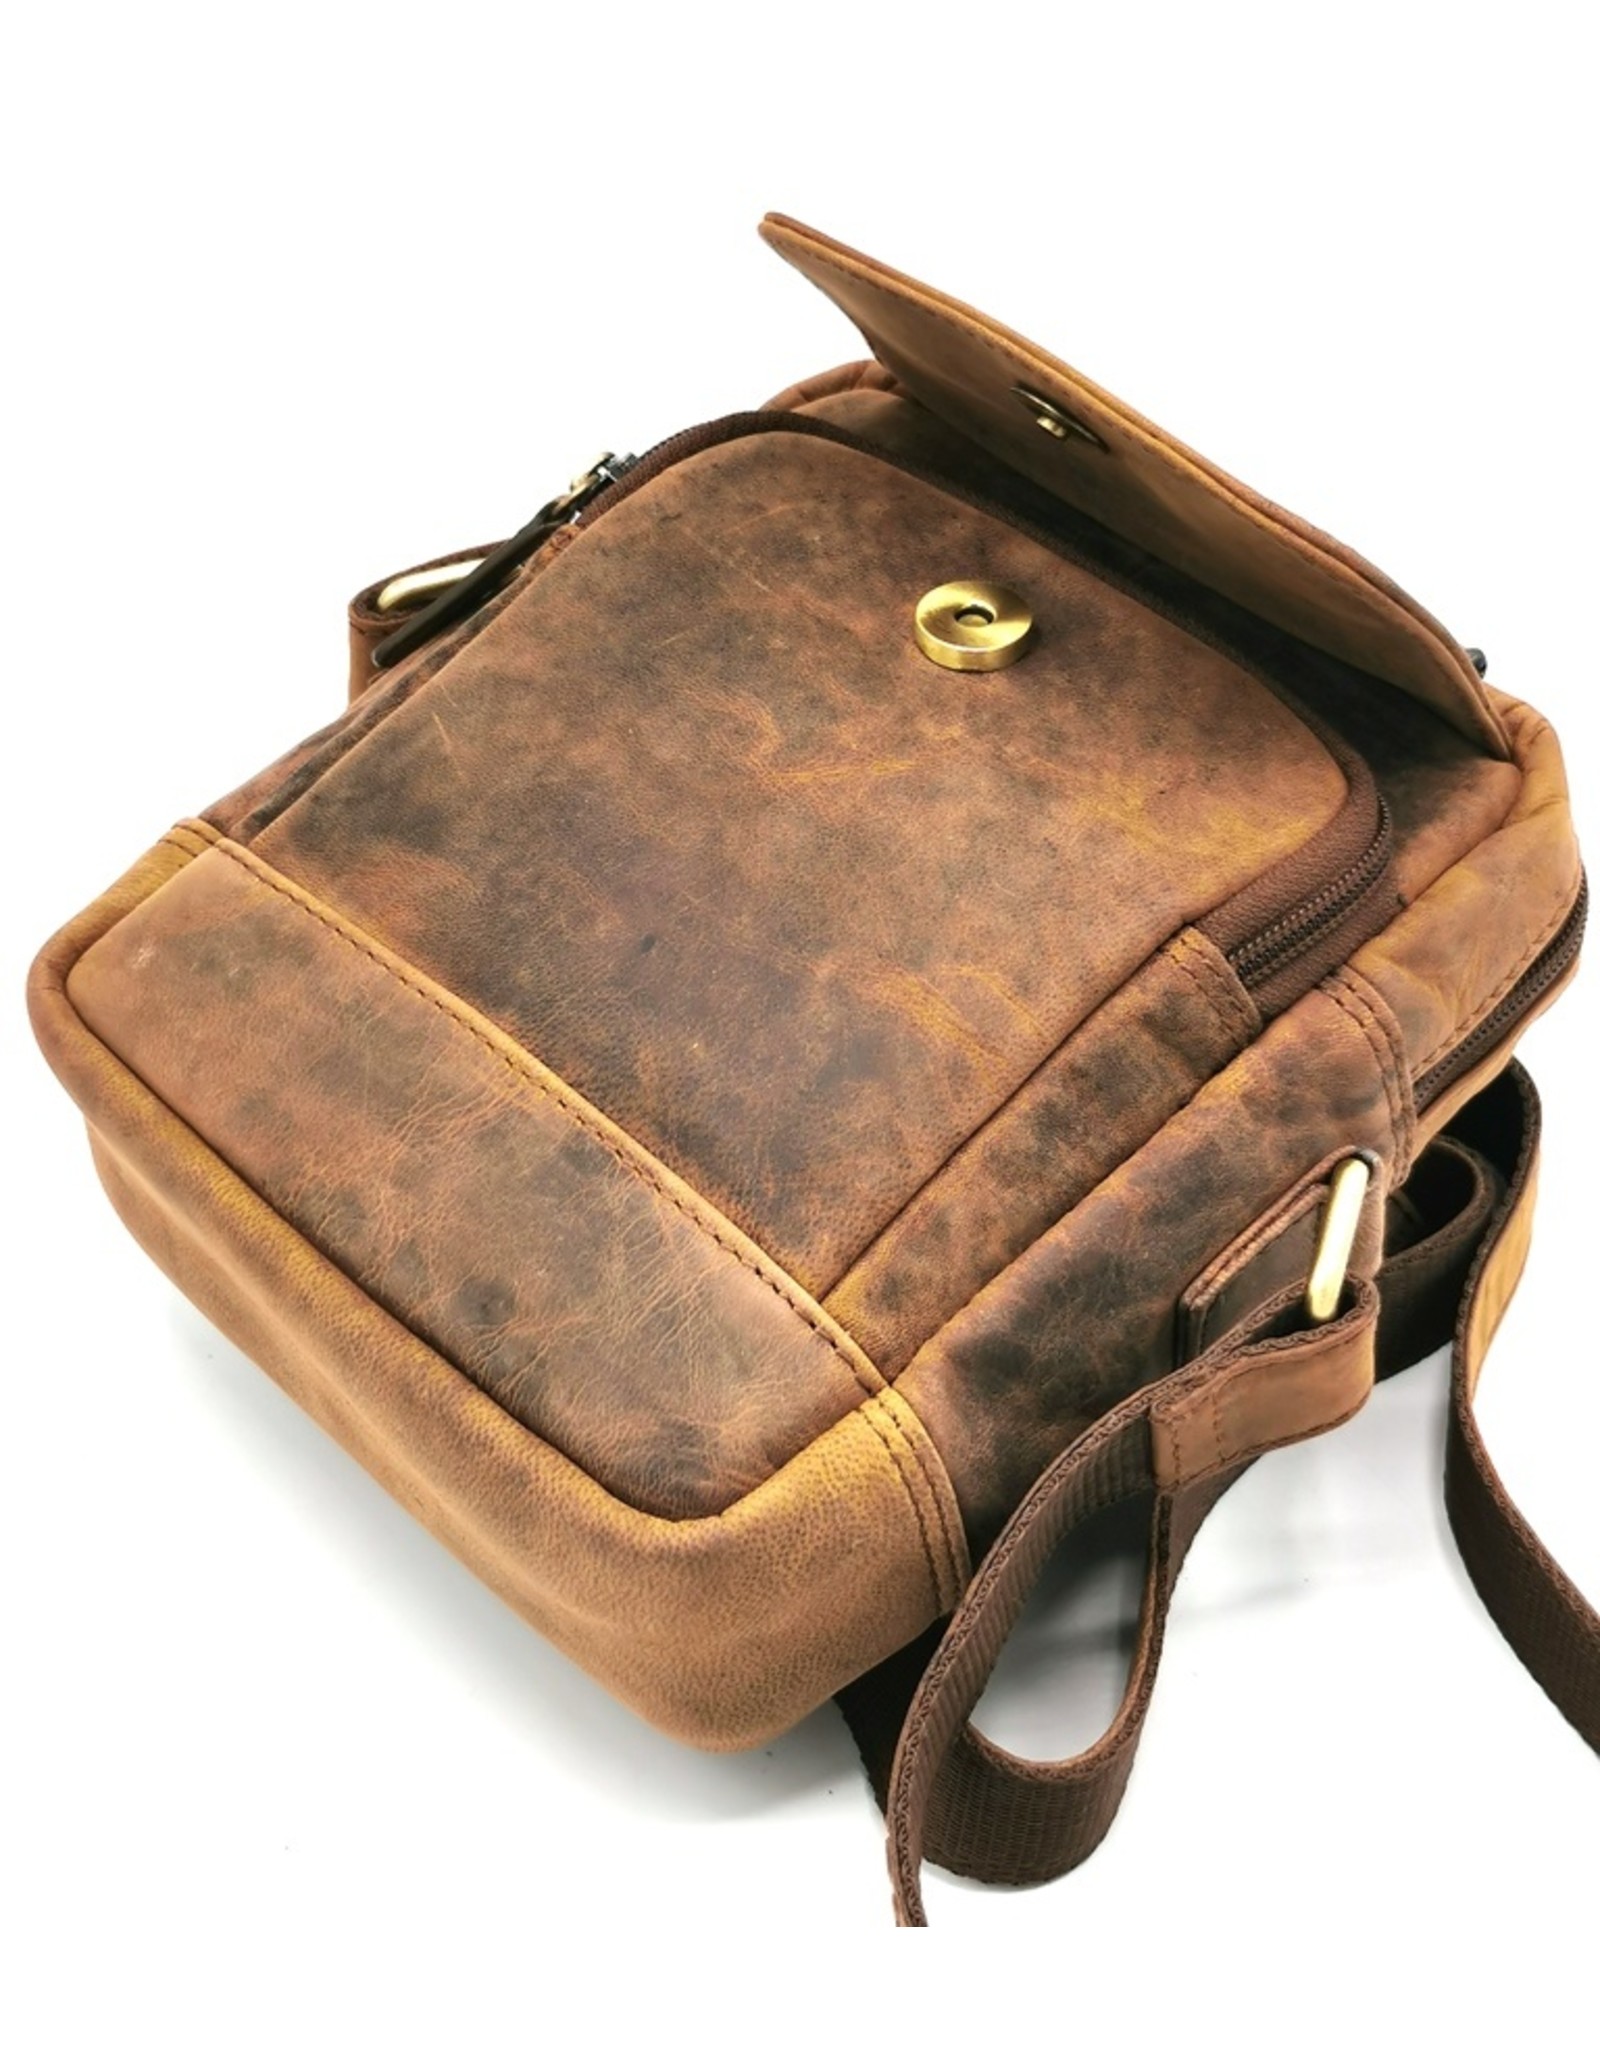 Hunters Leather bags - Hunters shoulder bag crossbody small brown